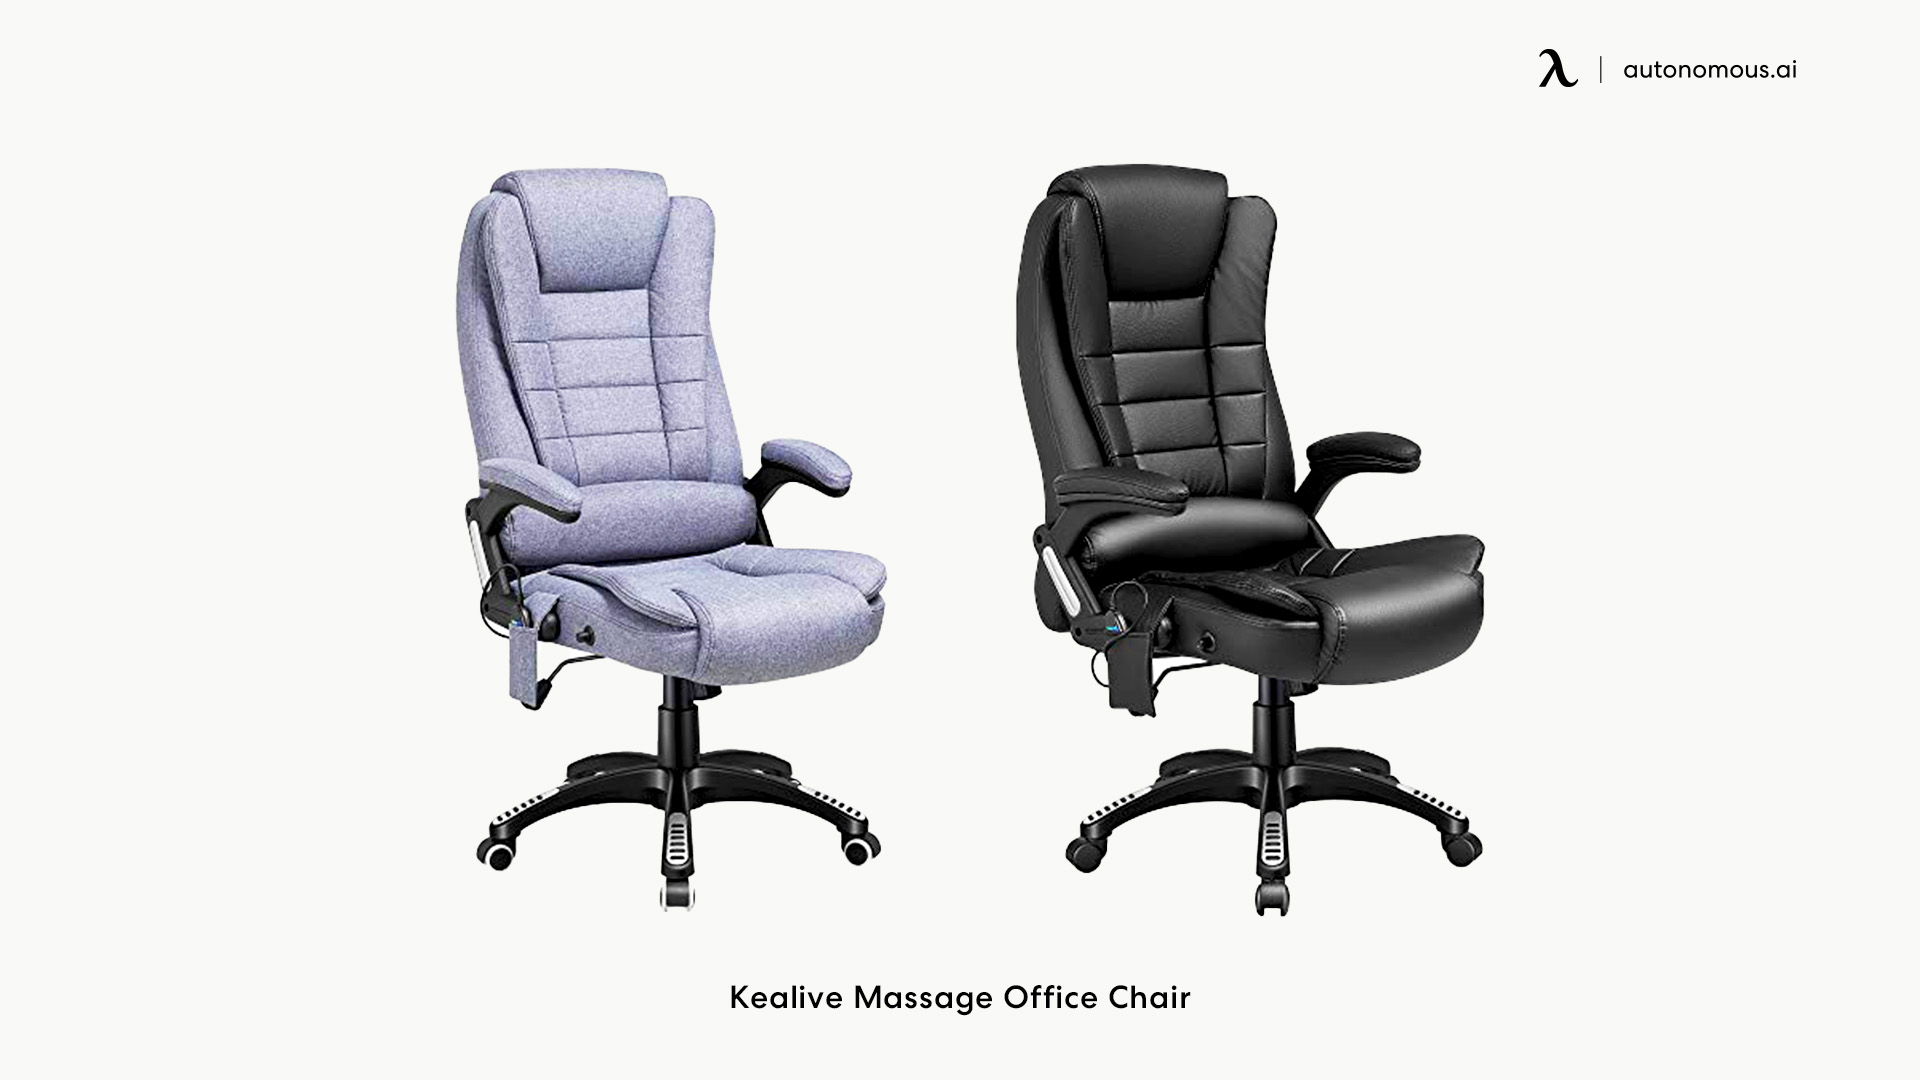 Kealive Massage office chair with footrest